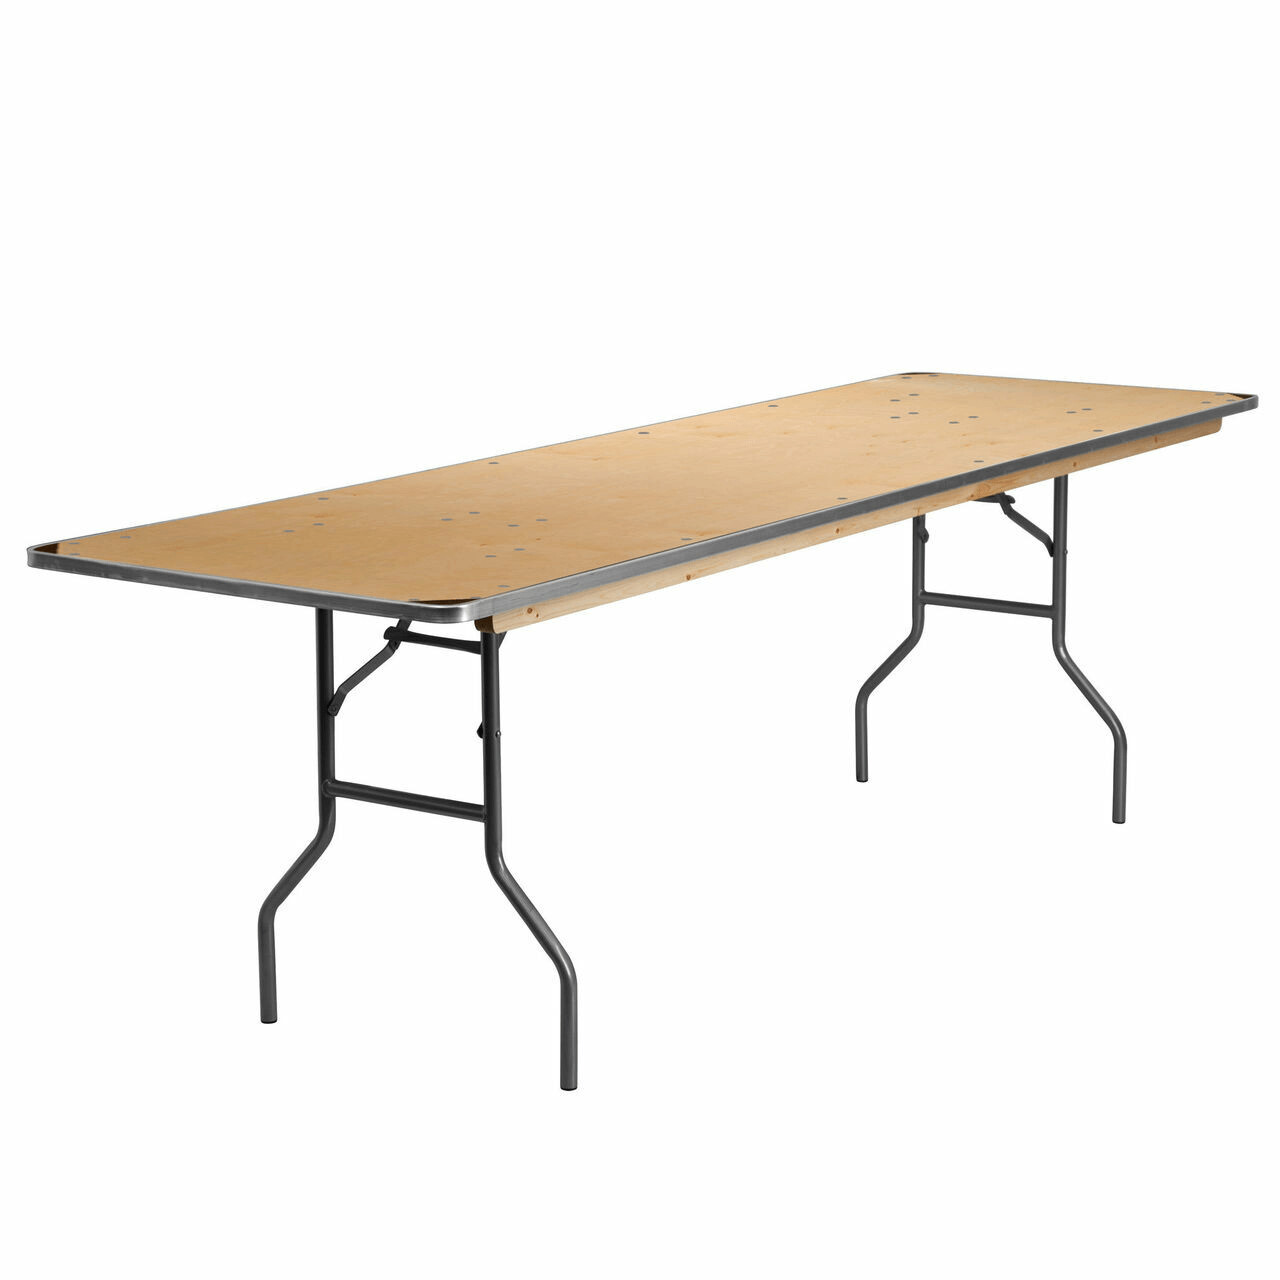 8-Foot Banquet Table